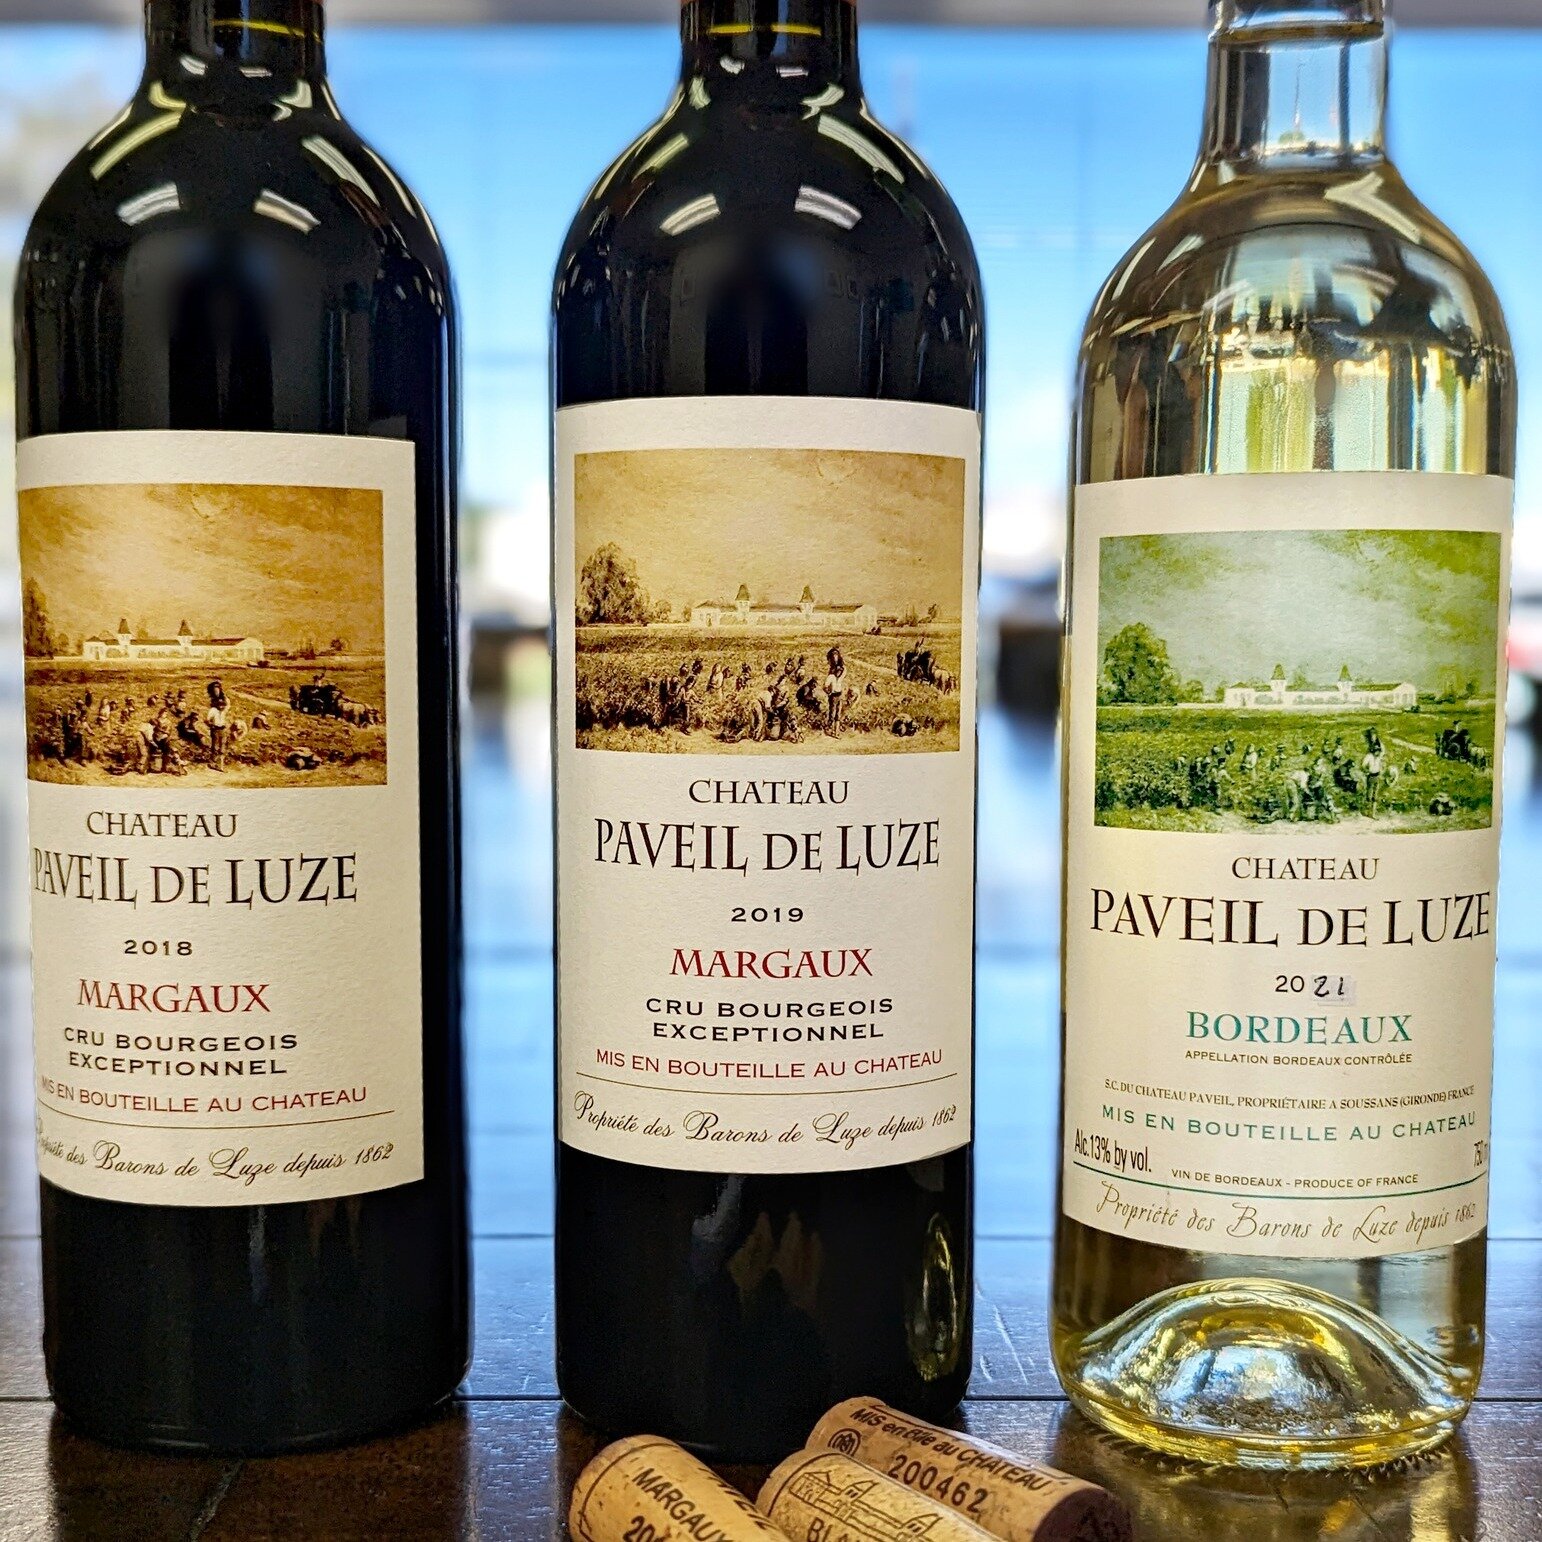 Ch&acirc;teau Paveil de Luze, Cru Bourgeois Exceptionnel, was presented at MISA HQ by our good friend Marion Lopez of LD Vins and we had a very enjoyable tasting of the 2018 and 2019 vintages, as well as their 2021 Bordeaux Blanc. 

Ch&acirc;teau Pav